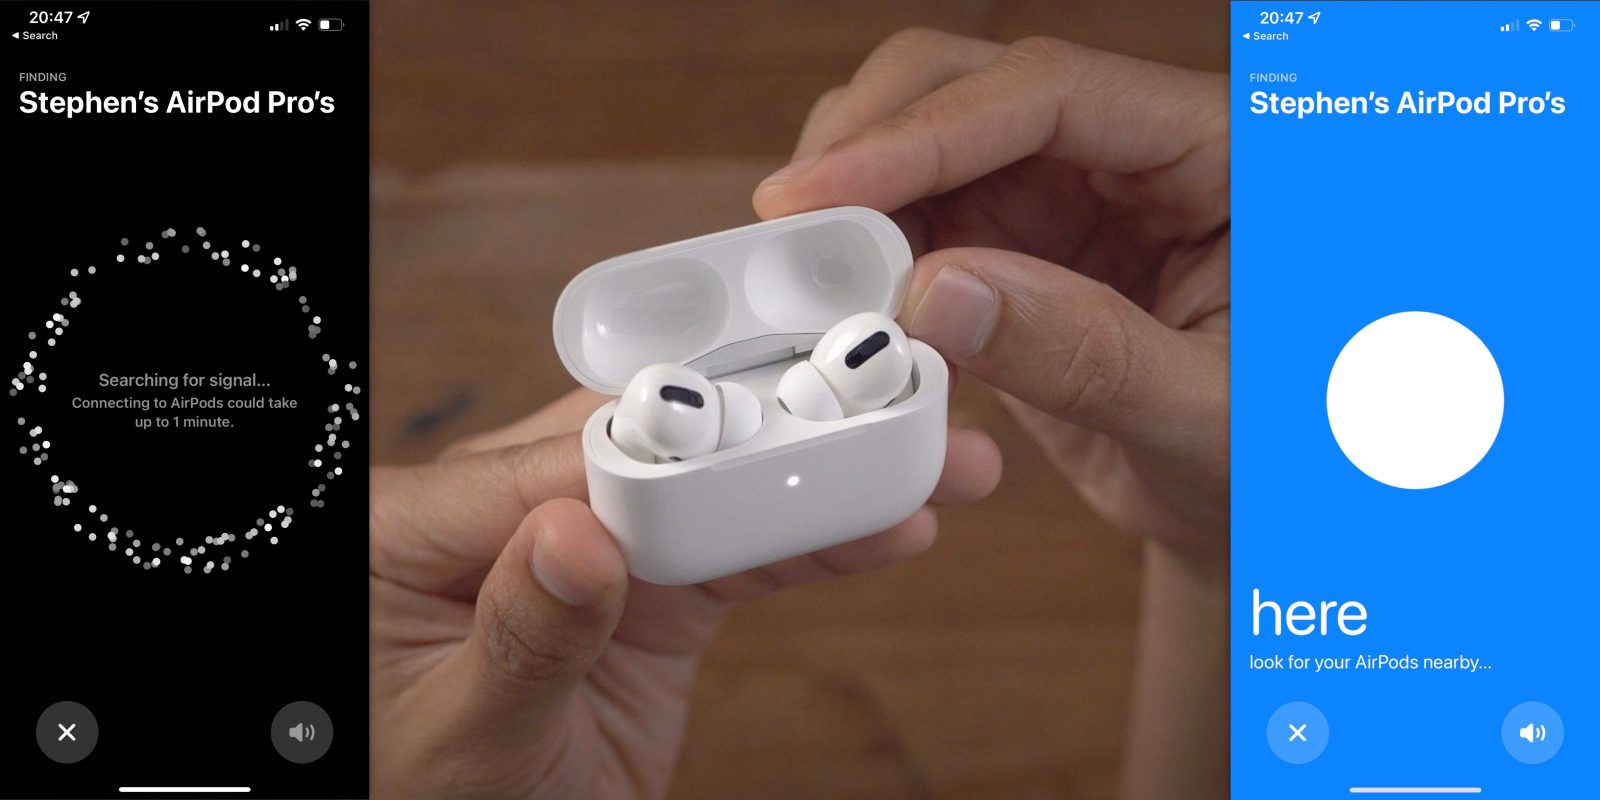 Cool Stuff! Twitter Users Showing Off Their Quirky AirPod Cases in